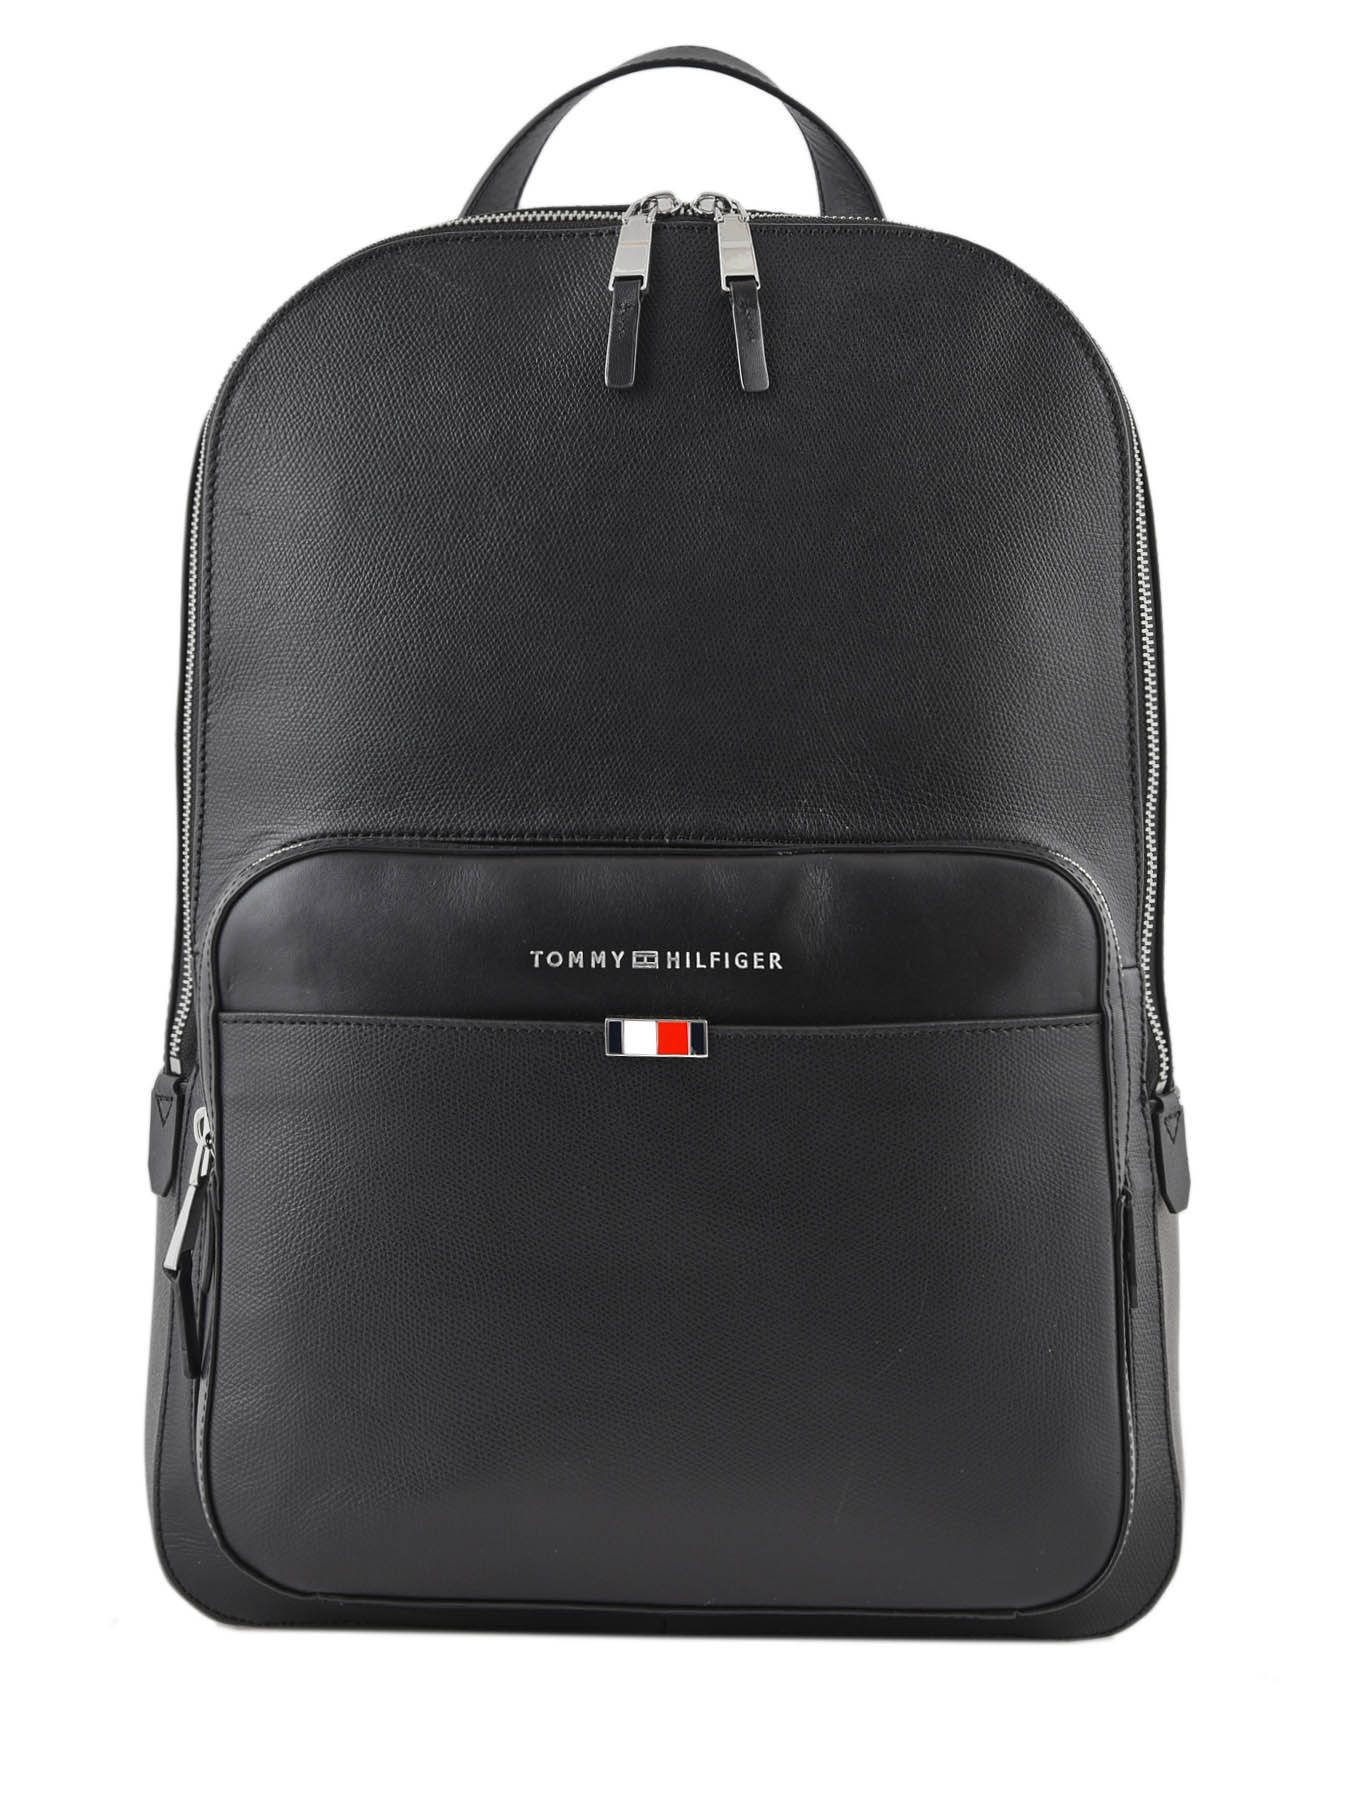 cheap tommy hilfiger backpack